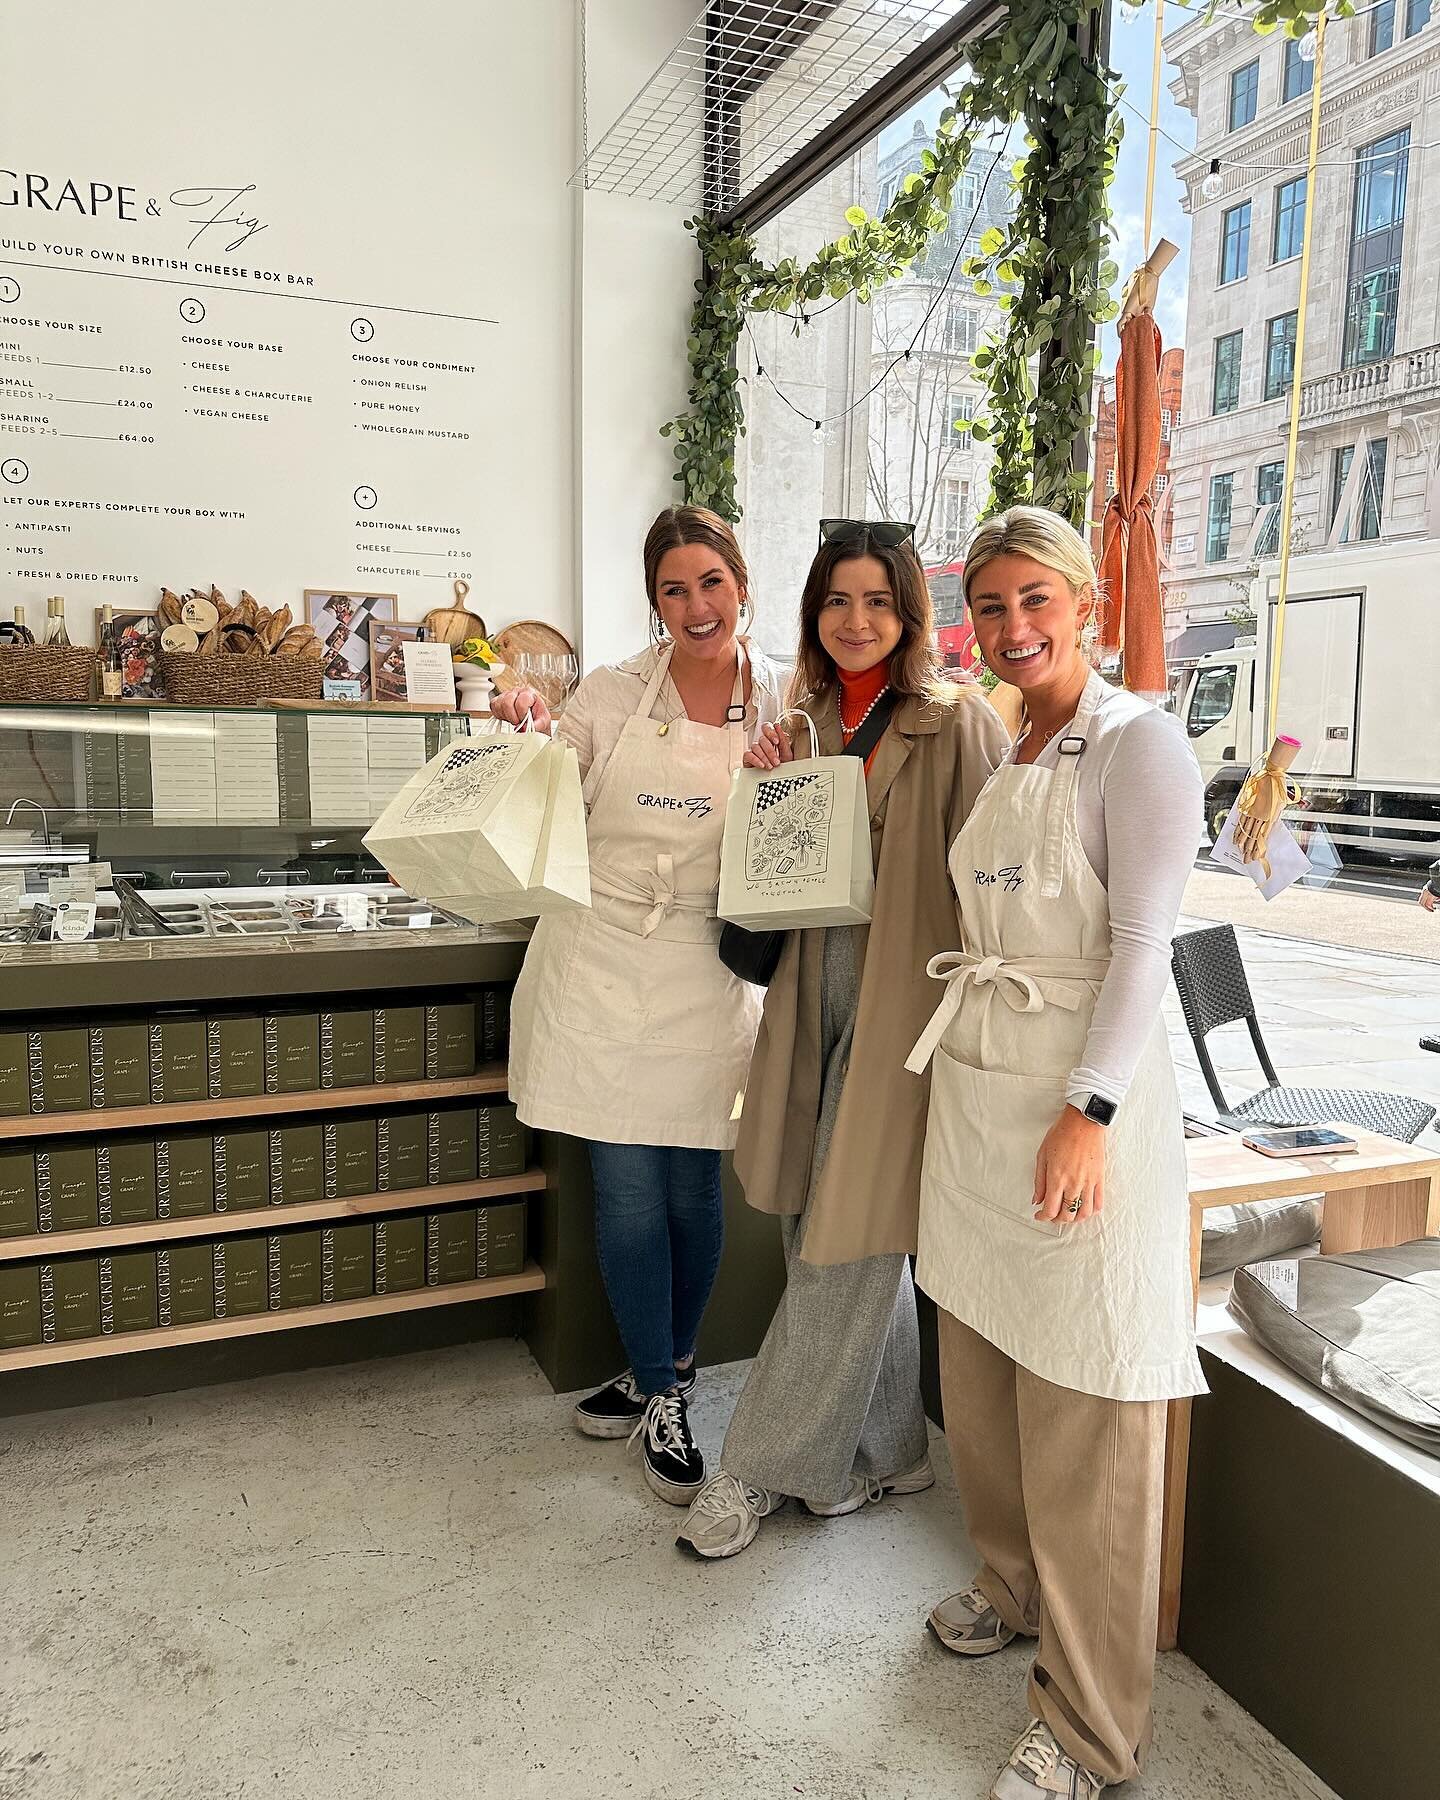 The biggest congratulations to Toria and Cath the lovely sisters behind @grapeandfig who are at @brityardhq on Regents Street with a build your own British cheese box 🧀😋 and all packaged up in a bag illustrated by yours truly 🥹

So so happy for yo